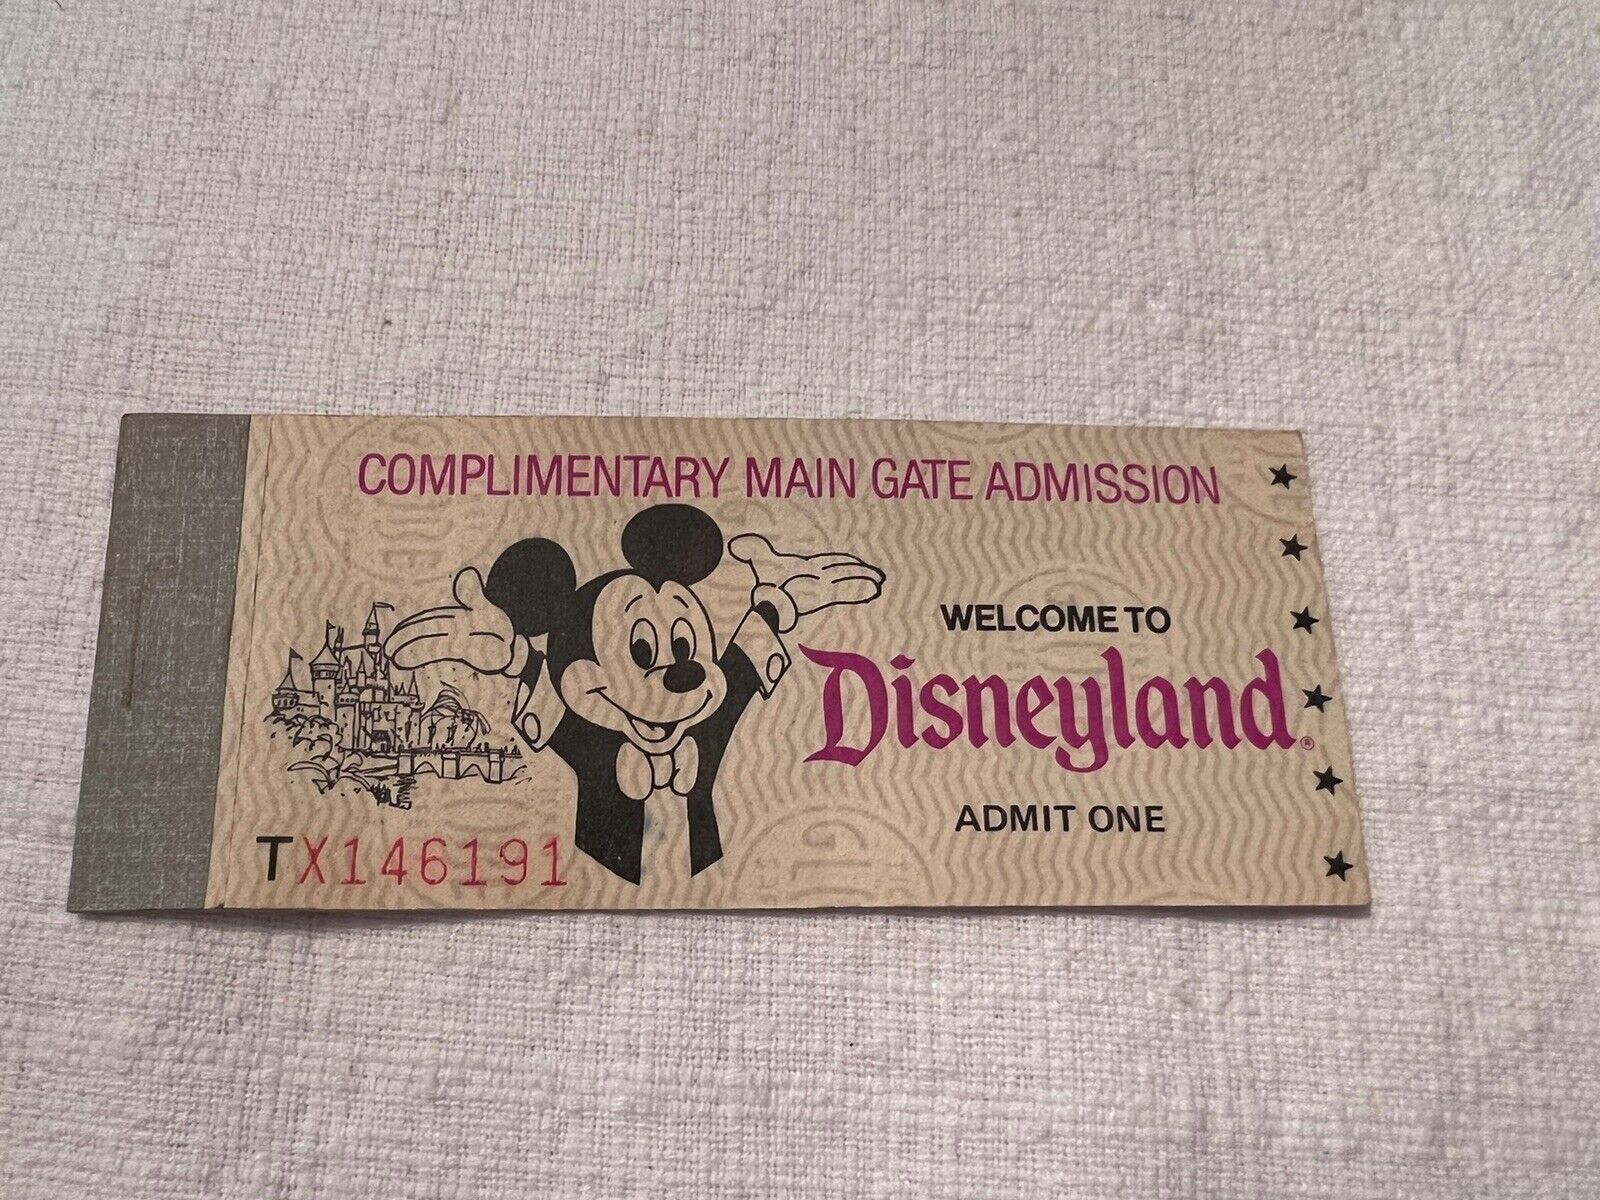 Vintage Disneyland Main Gate Admission Ticket And Coupon Book, Circa 1980